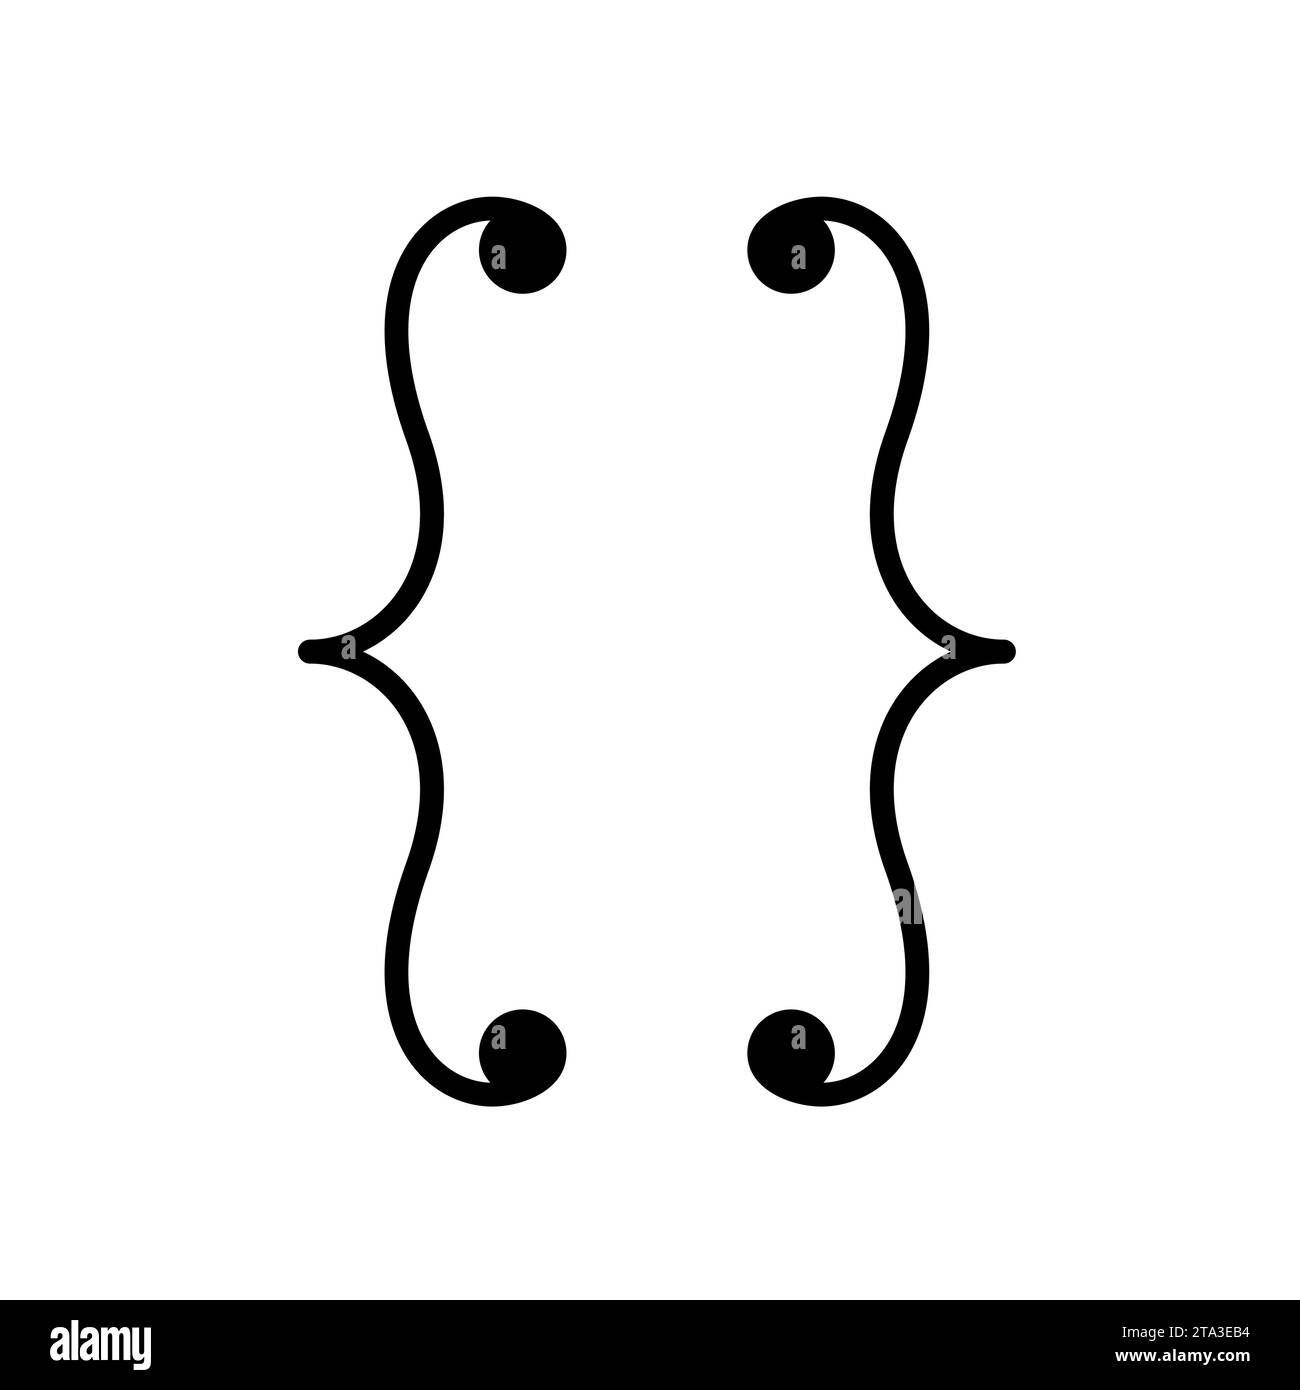 Curly braces icon for graphic design isolated on white background, Brackets symbolic elements. Vector illustration. Stock Vector